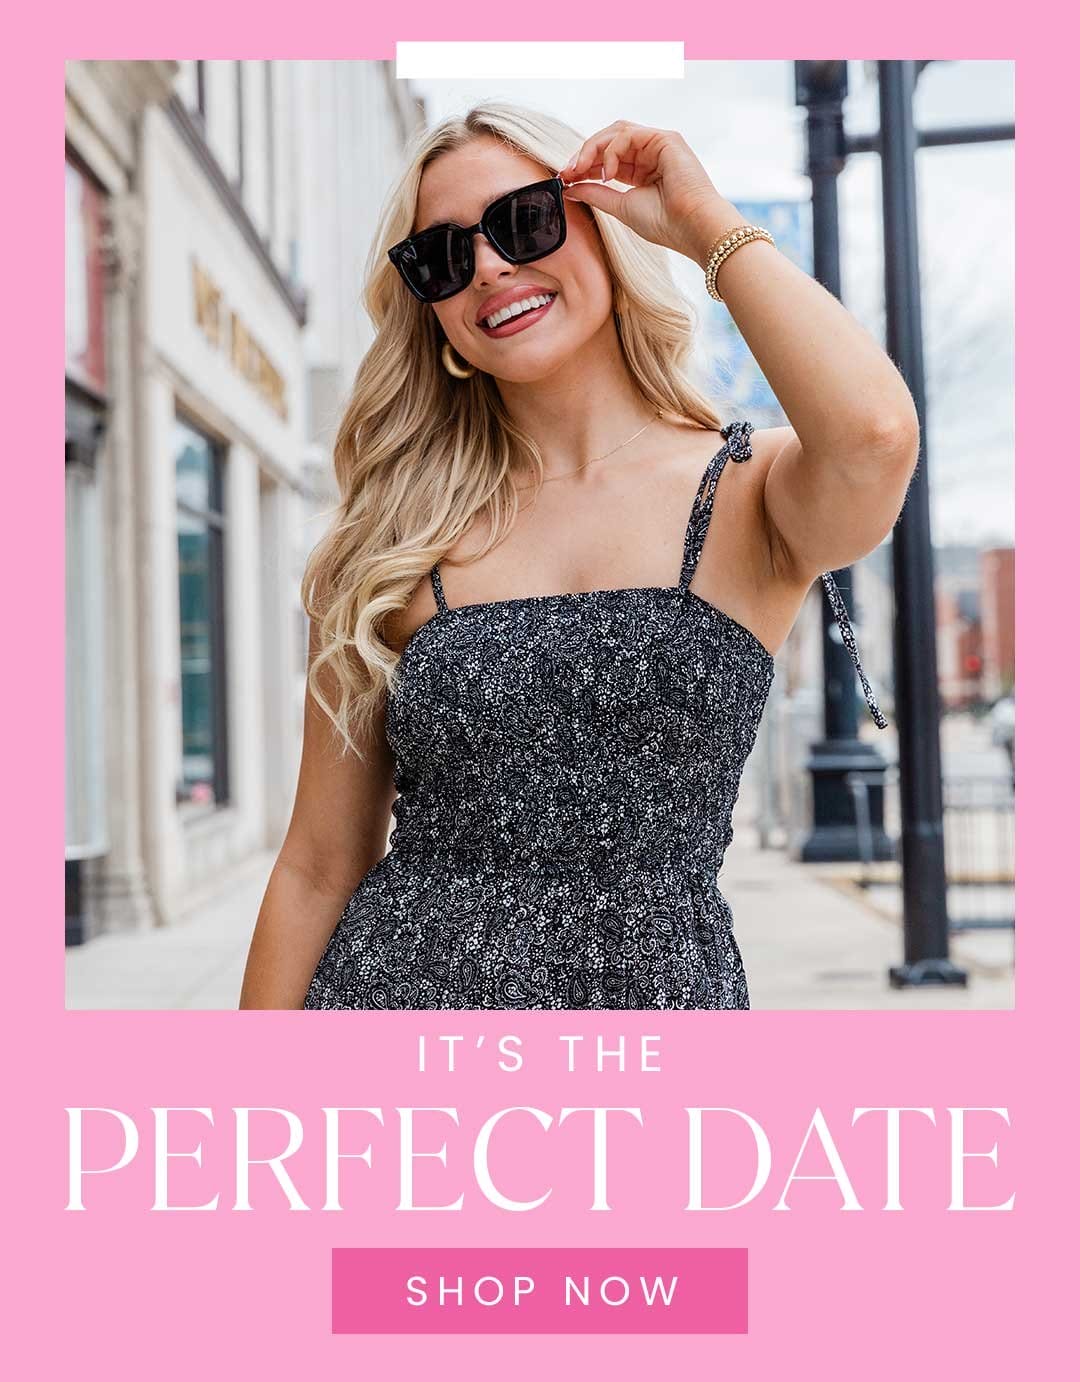 SHOP NEW ARRIVALS - IT'S THE PERFECT DATE